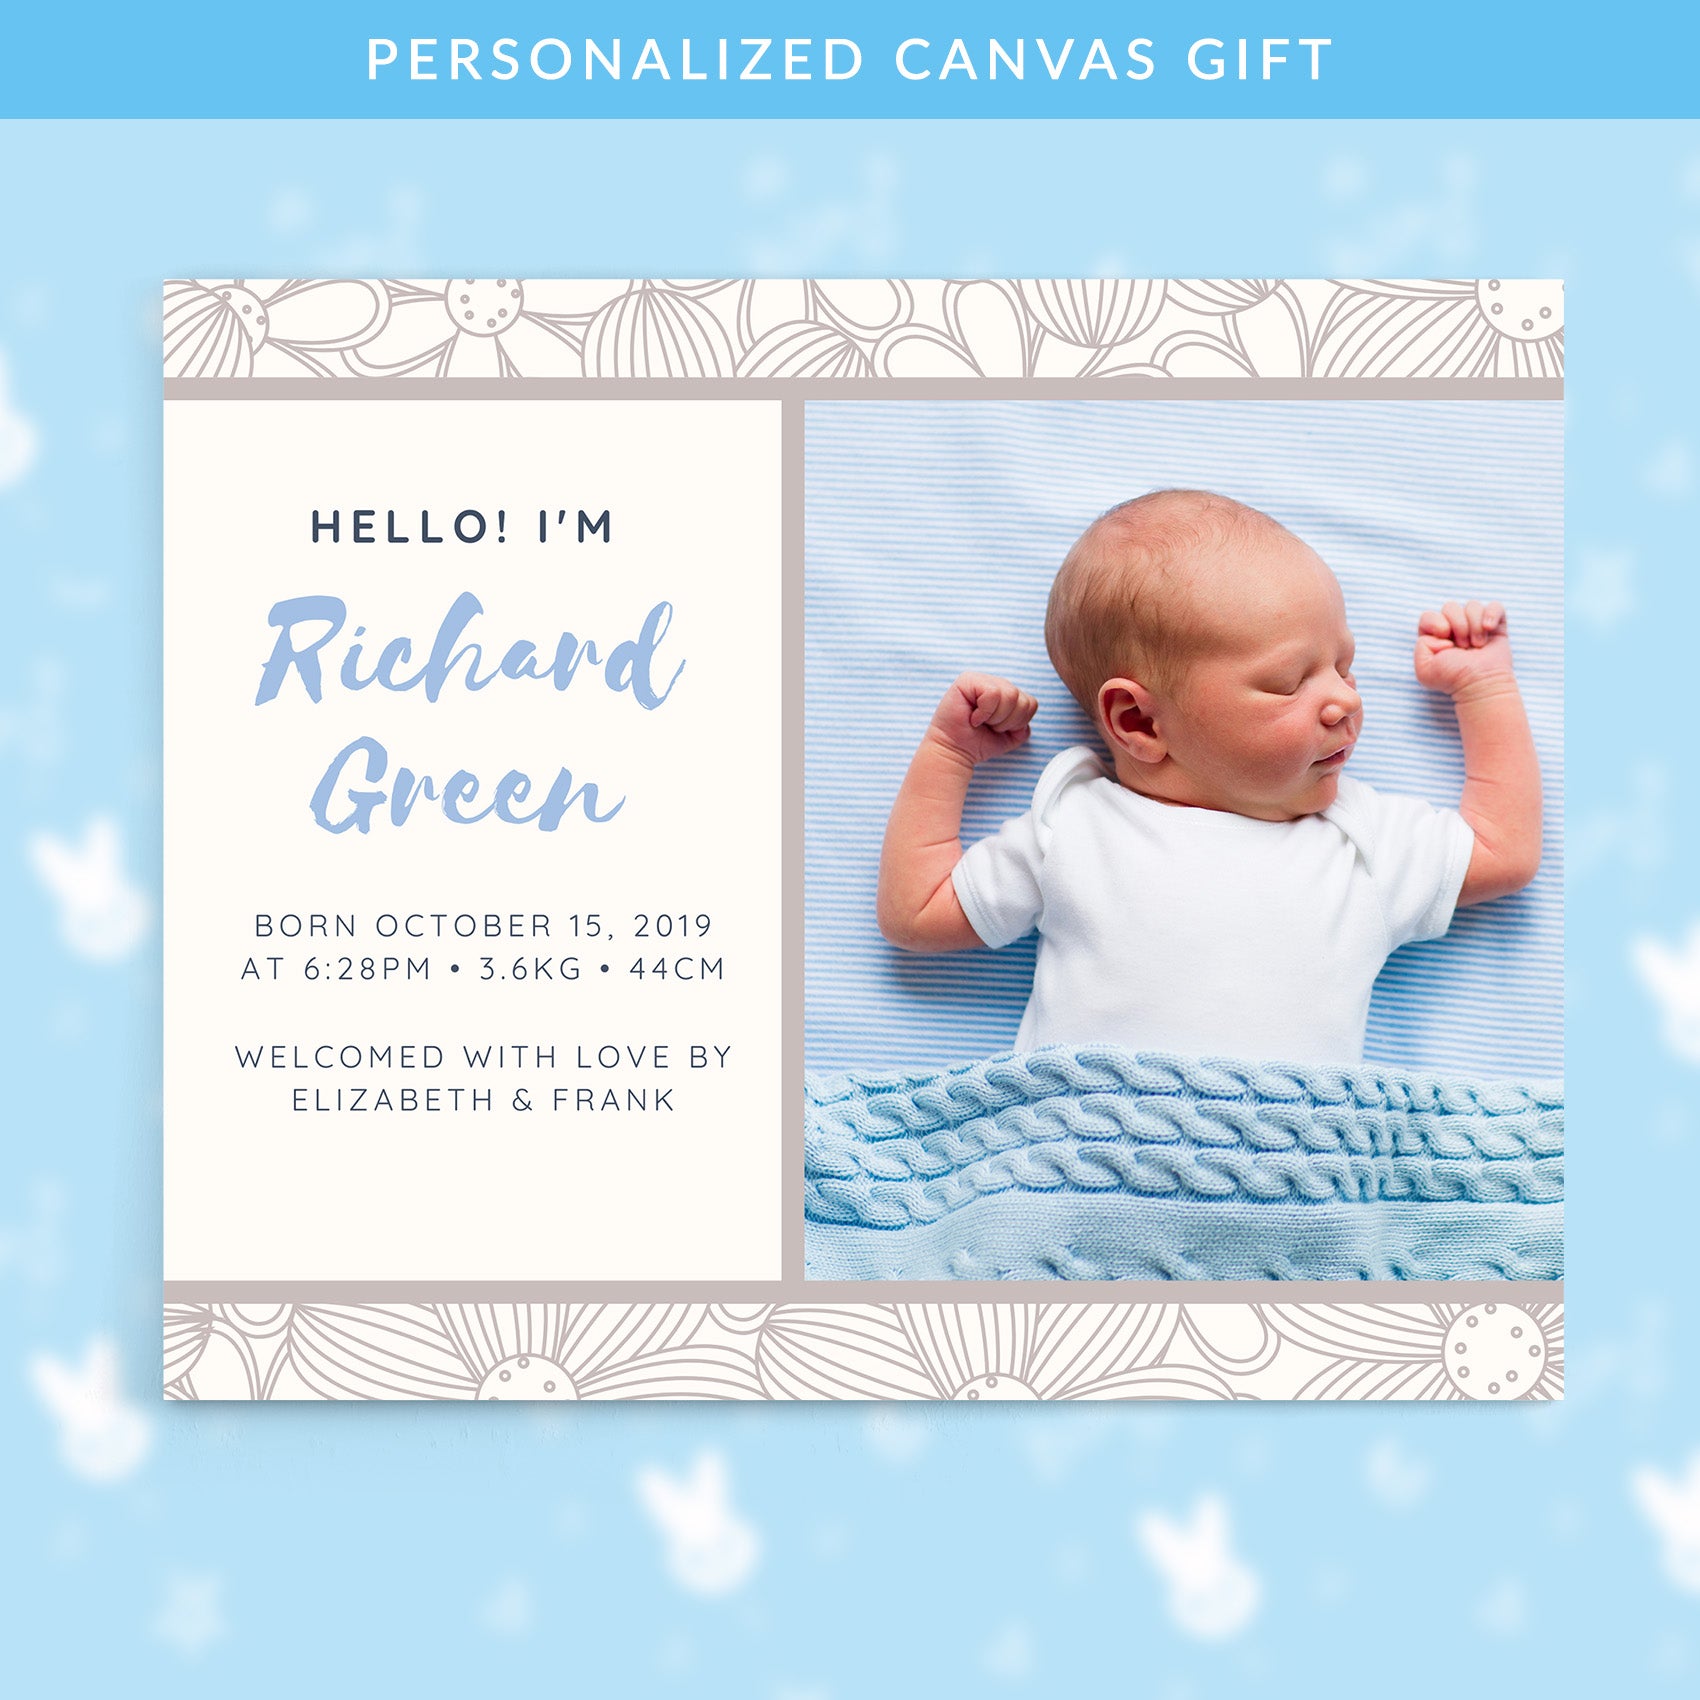 Personalized Baby Canvas Gift - Custom Canvas Art (Landscape)